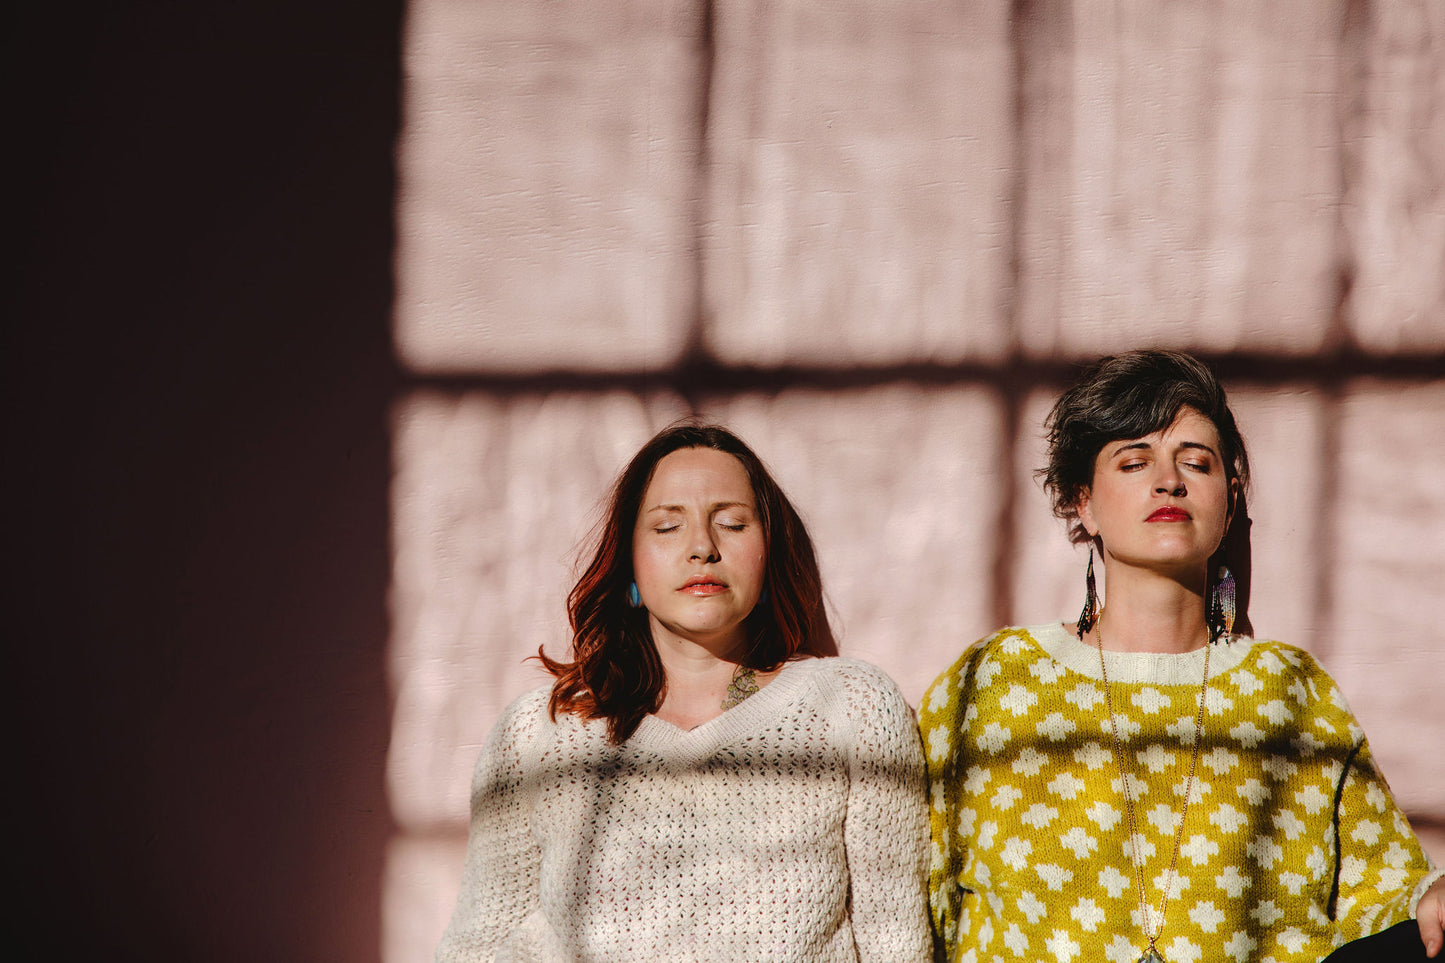 Bess and Jen stand against a wall, seen from the waist up, with their eyes closed. Bess wears a cream lace knit sweater (the Mary Raglan), and Jen wears a yellow knit sweater with a white plusses pattern and trim (the Plusses sweater).